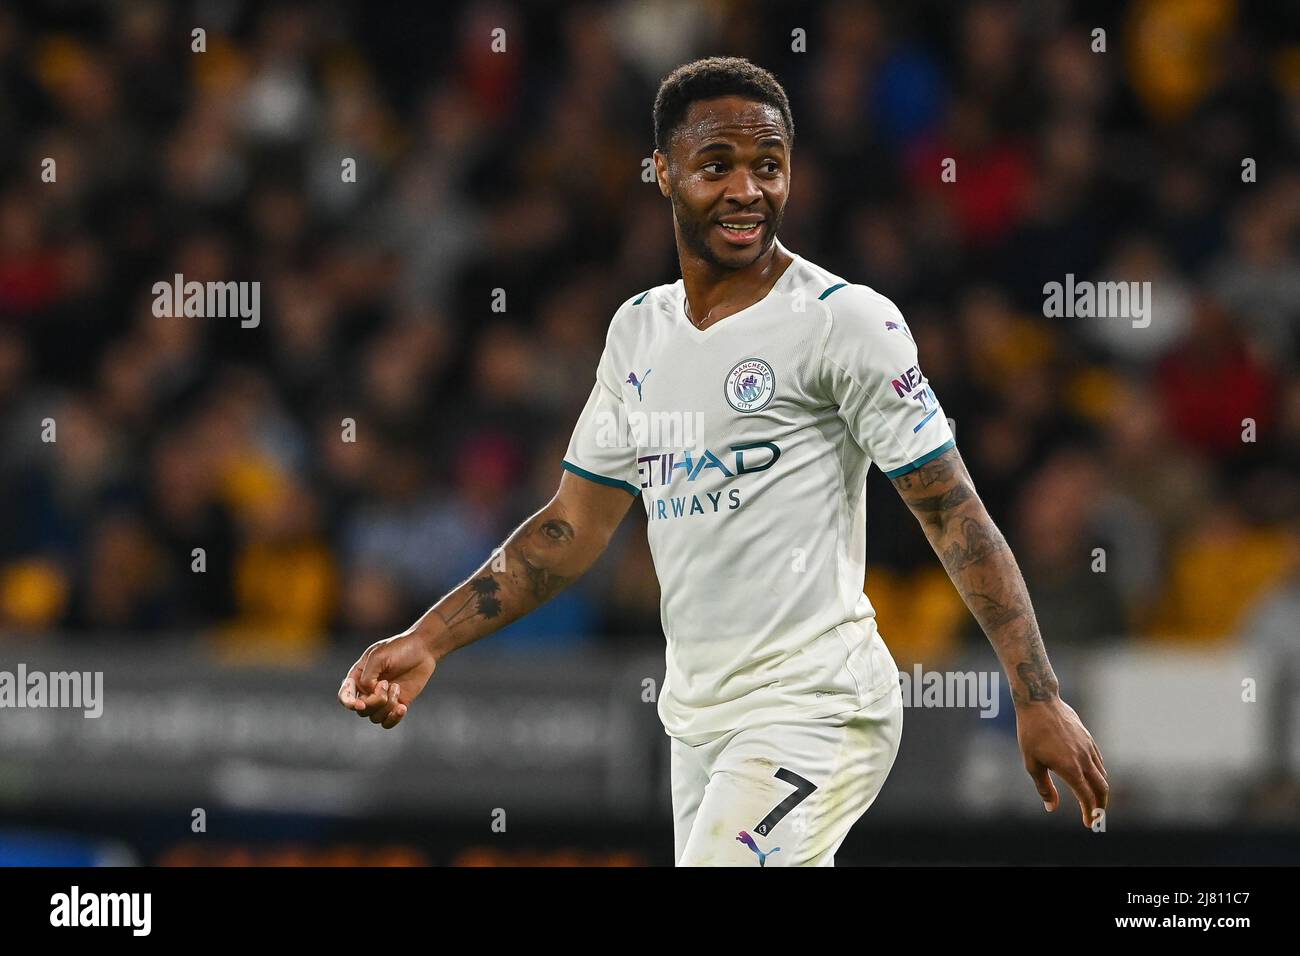 Raheem Sterling #7 of Manchester City during the game Stock Photo